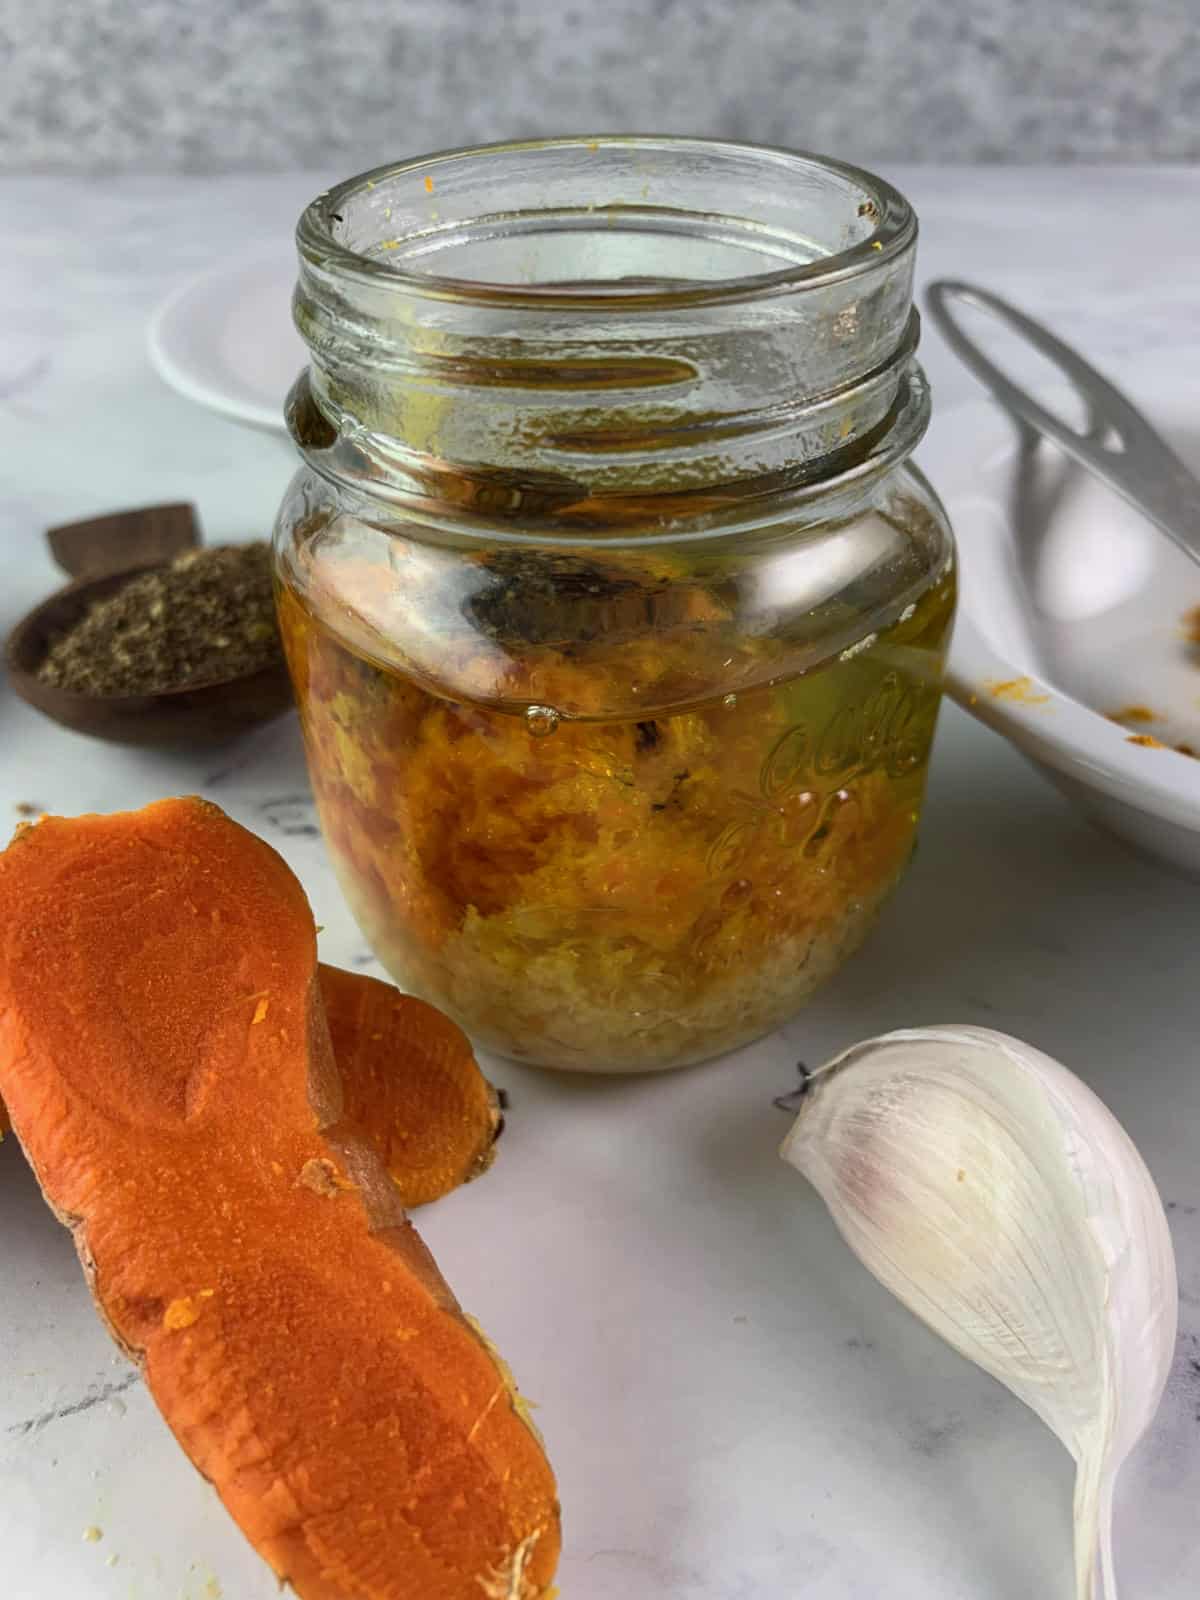 TUMERIC DRESSING INGREDIENTS IN A GLASS JAR WITH FRESH TURMERIC & GARLIC ON THE SIDE